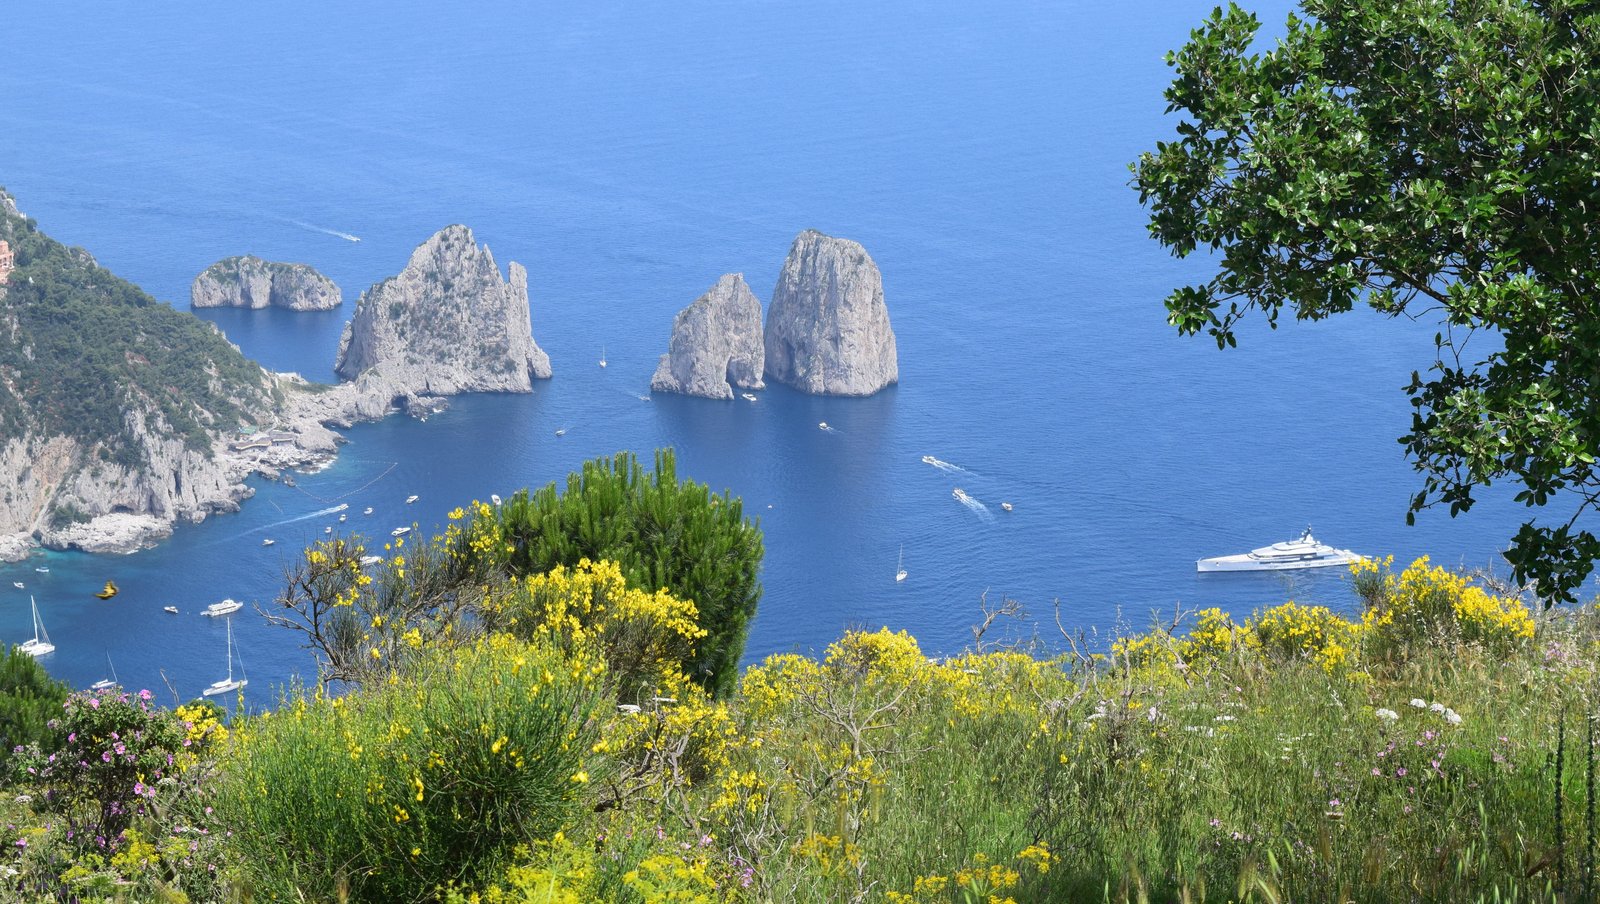 Island of Capri, infomation about getting there and things to do. Hotel and restaurant recommendations, ouritalianjourney.com https://ouritalianjurney.com/island-of-capri-amazing-stunning-destination